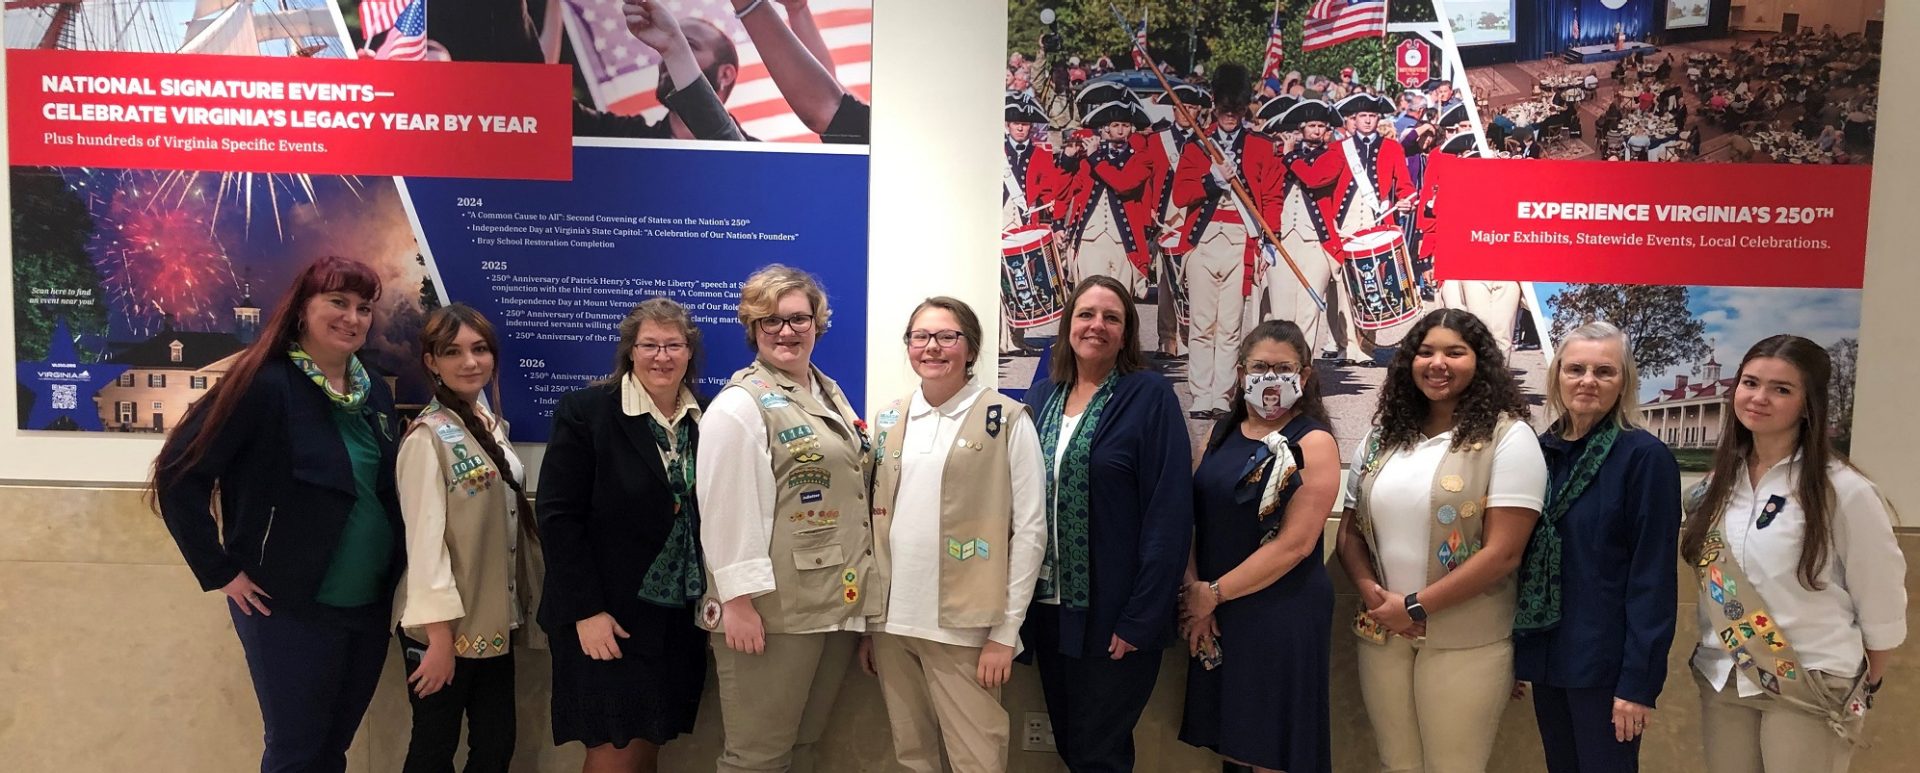  Group from GSCCC in front of an exhibit in the new General Assembly Building promoting the Virginia American Revolution 250 Commemoration, for the upcoming 250th anniversary of the American Revolution, the Revolutionary War, and the independence of the United States in the Commonwealth of Virginia.  